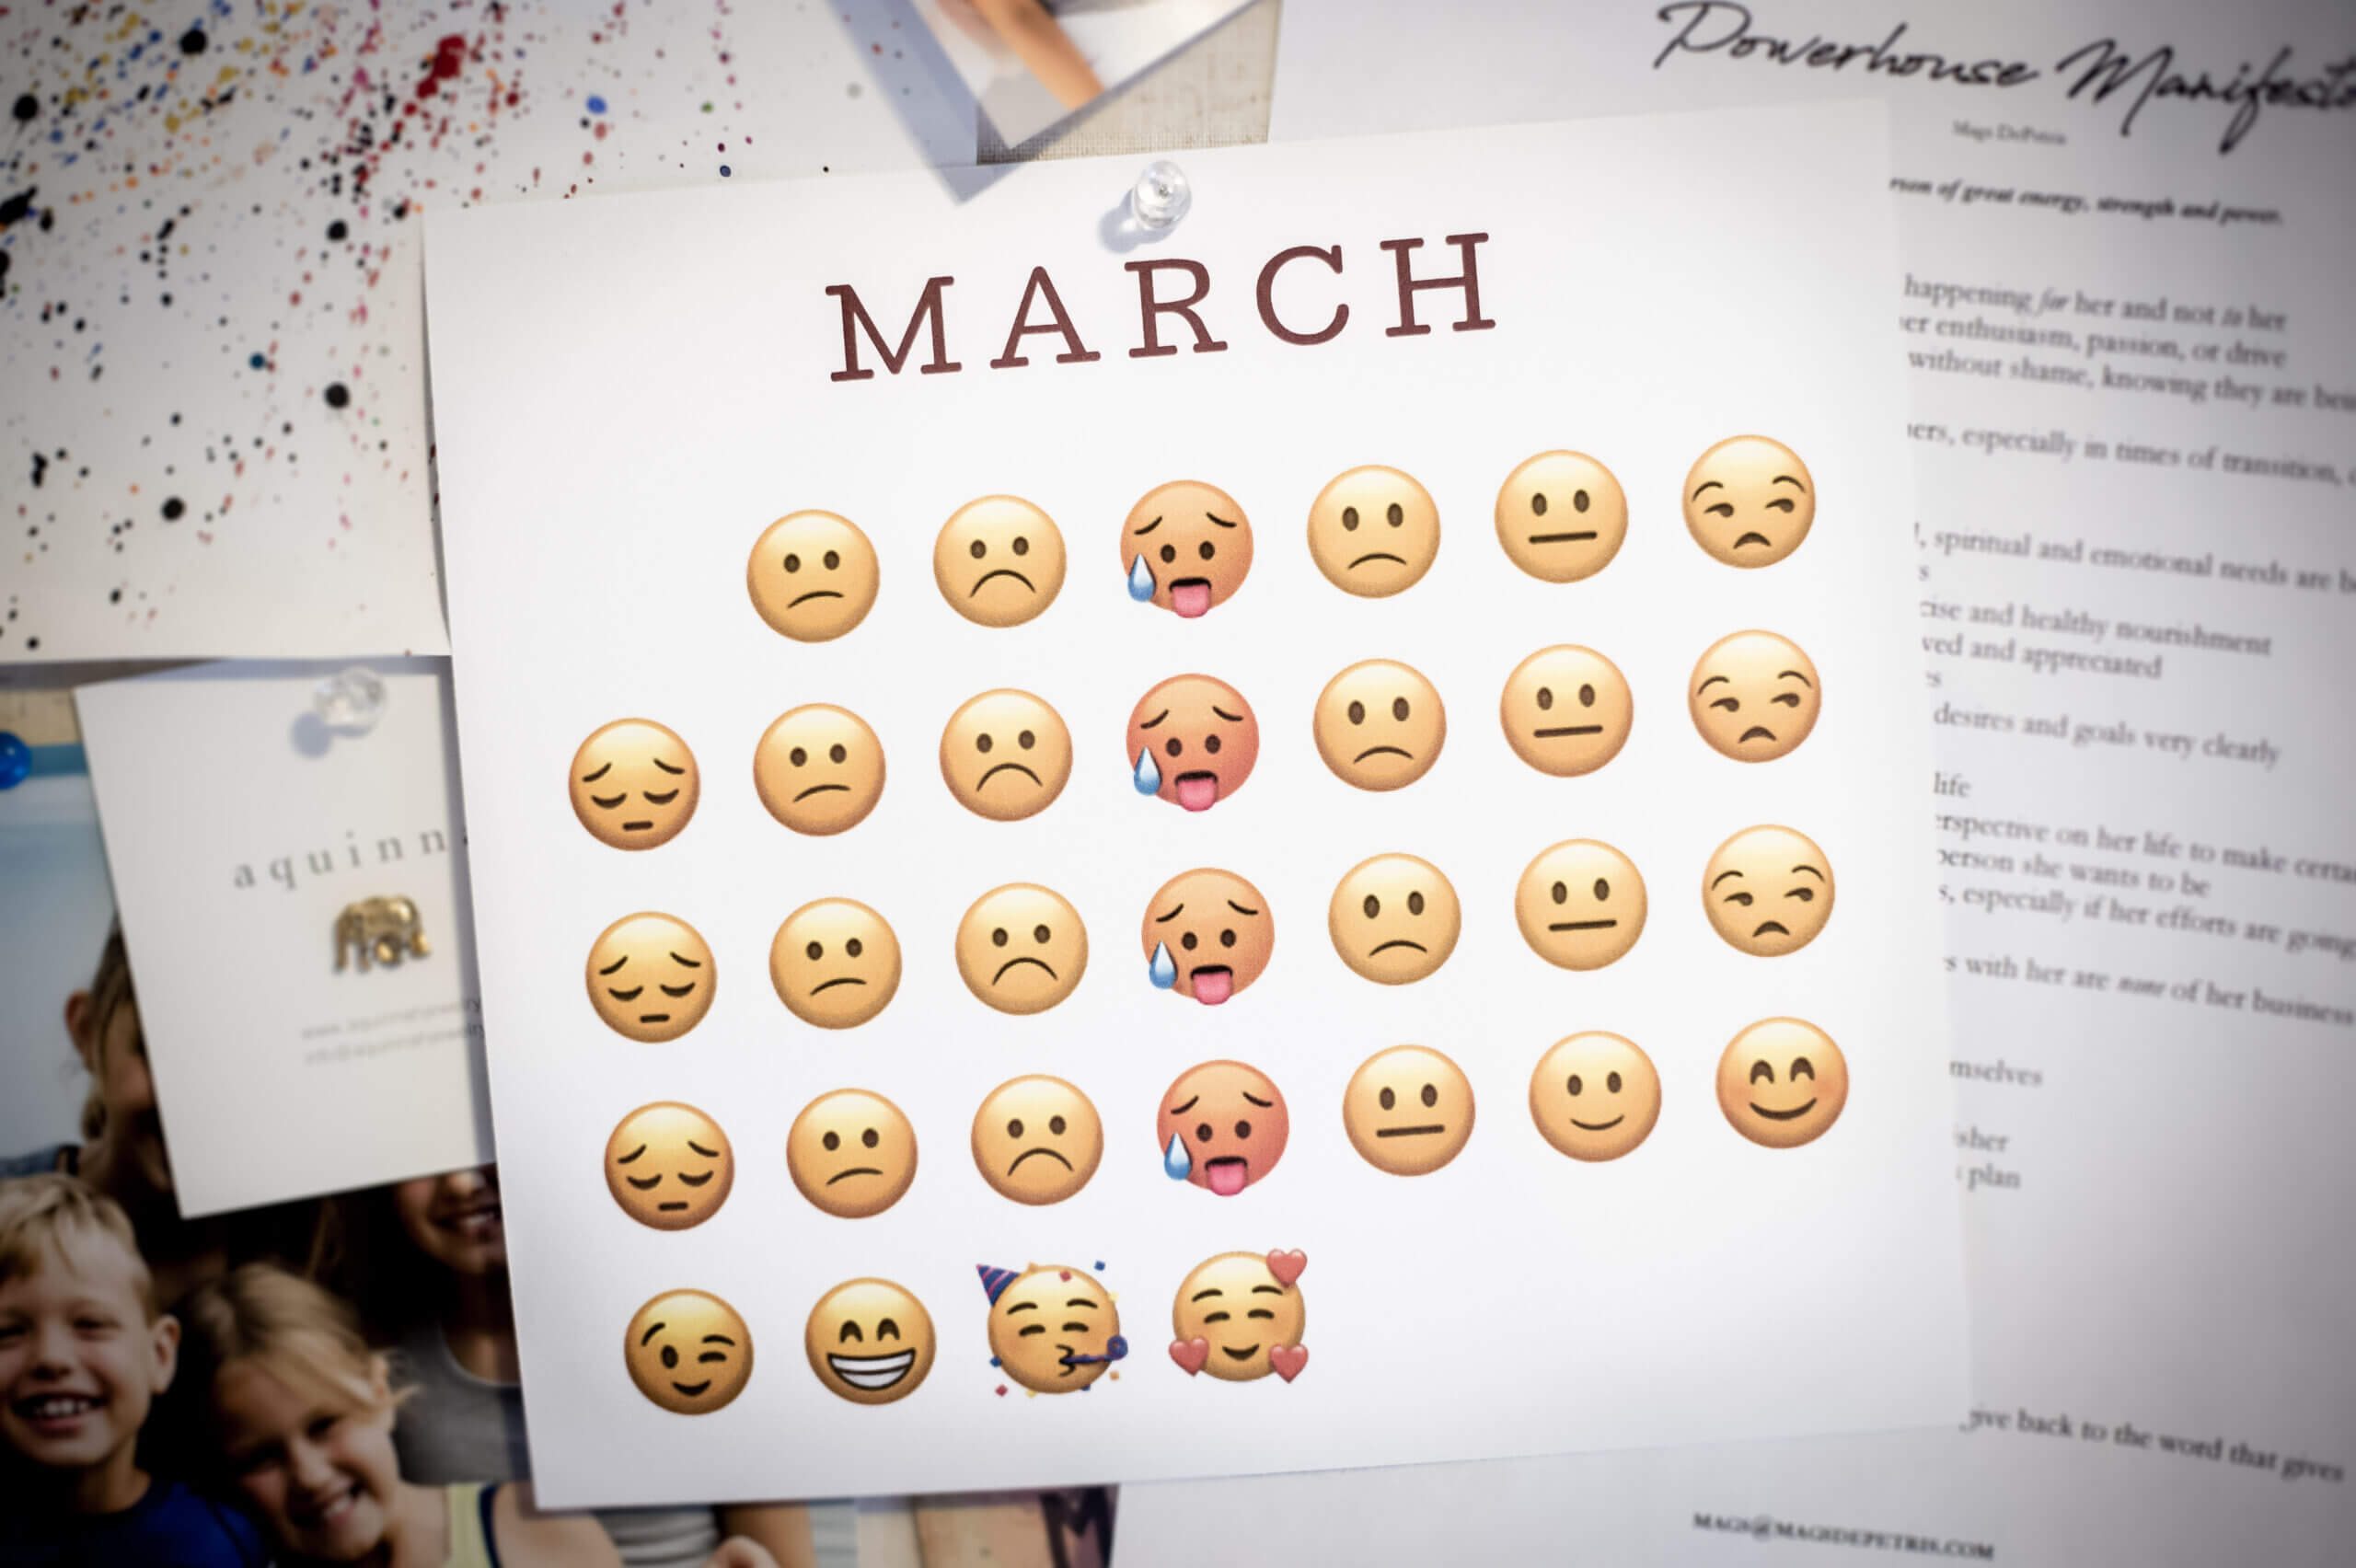 A March calendar on a cork board with emojis instead of numbers. All the emojis are sad or grumpy and begin to change to happy emojis at the end of the month.